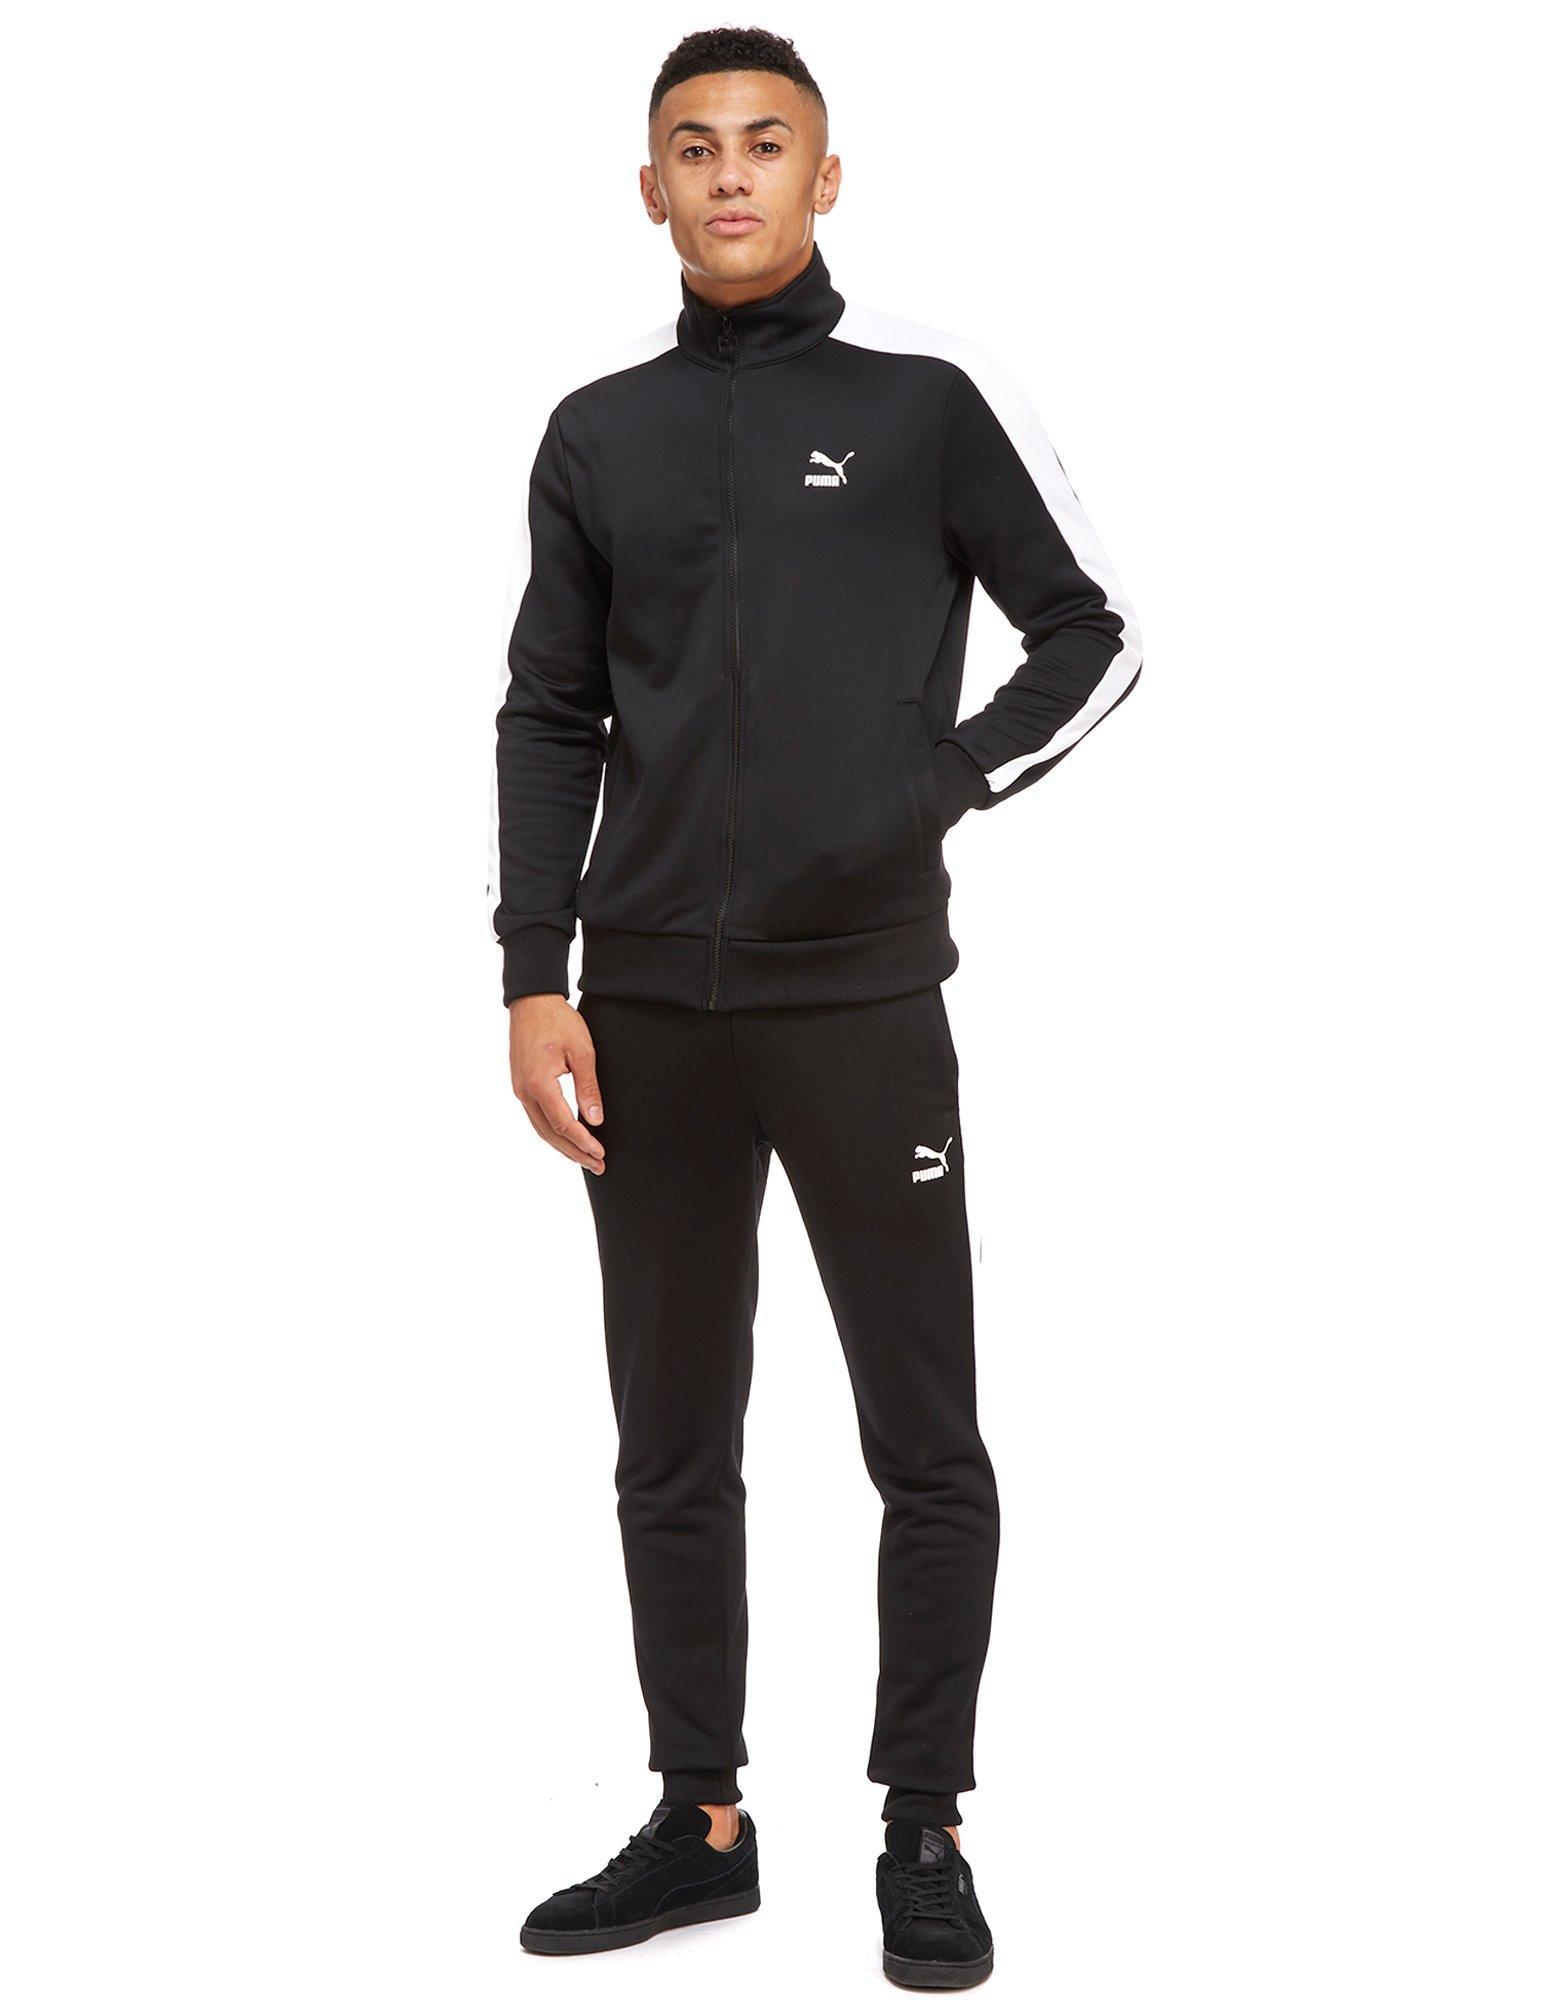 PUMA Cotton Archive T7 Tracksuit Top in Black for Men - Lyst